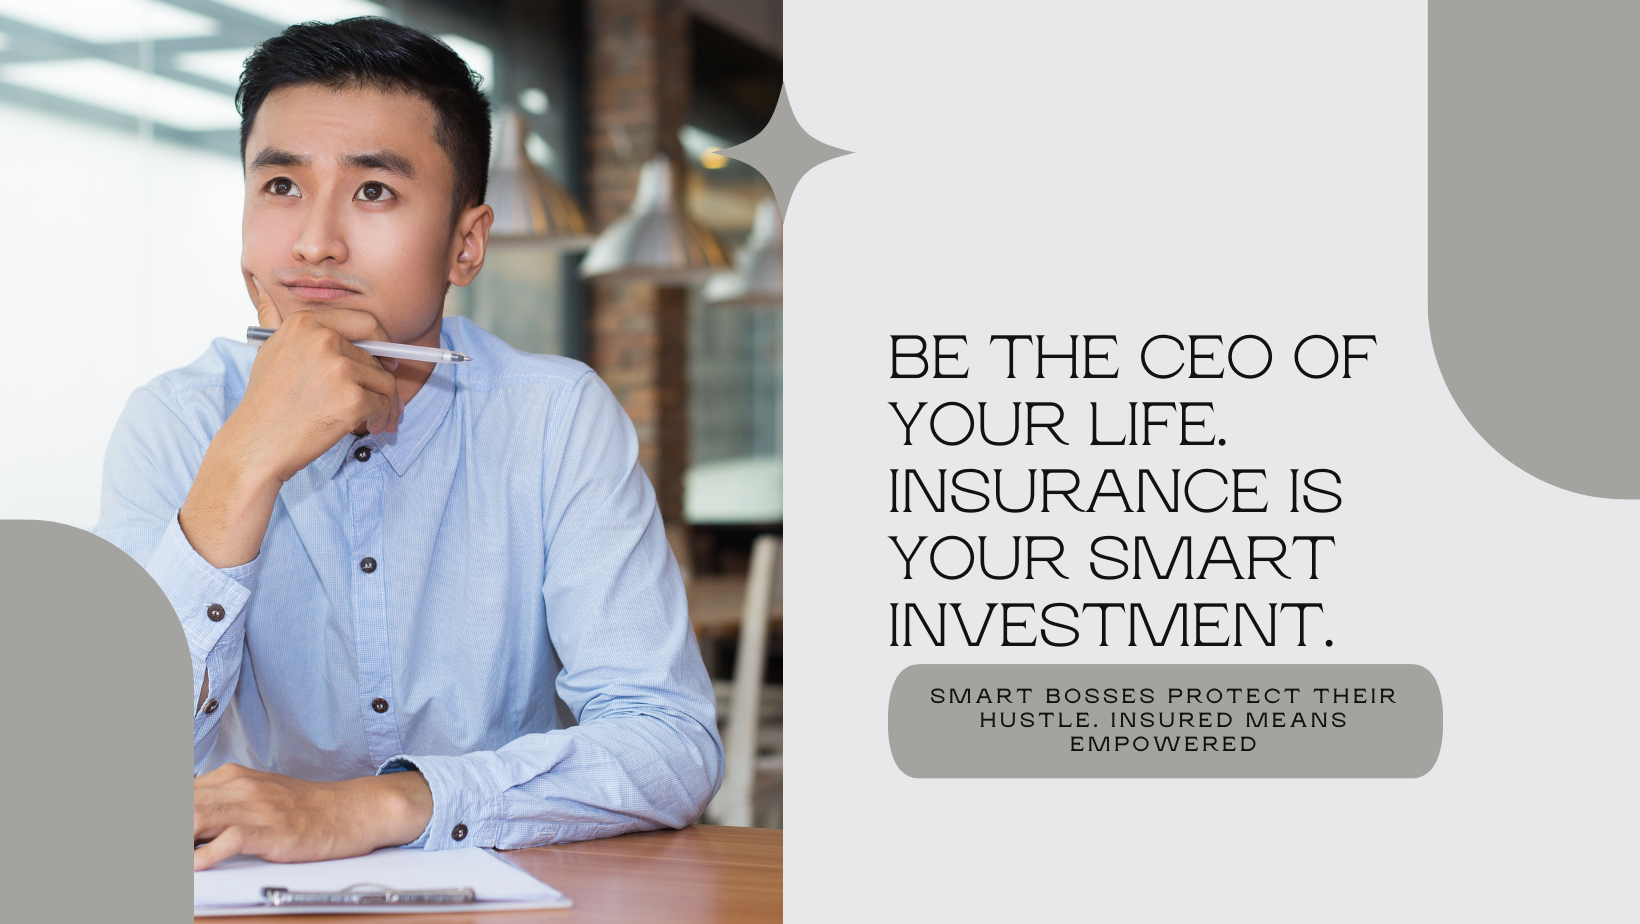 Be Your Own Boss Self-Employed Insurance Singapore is the Bottom Line